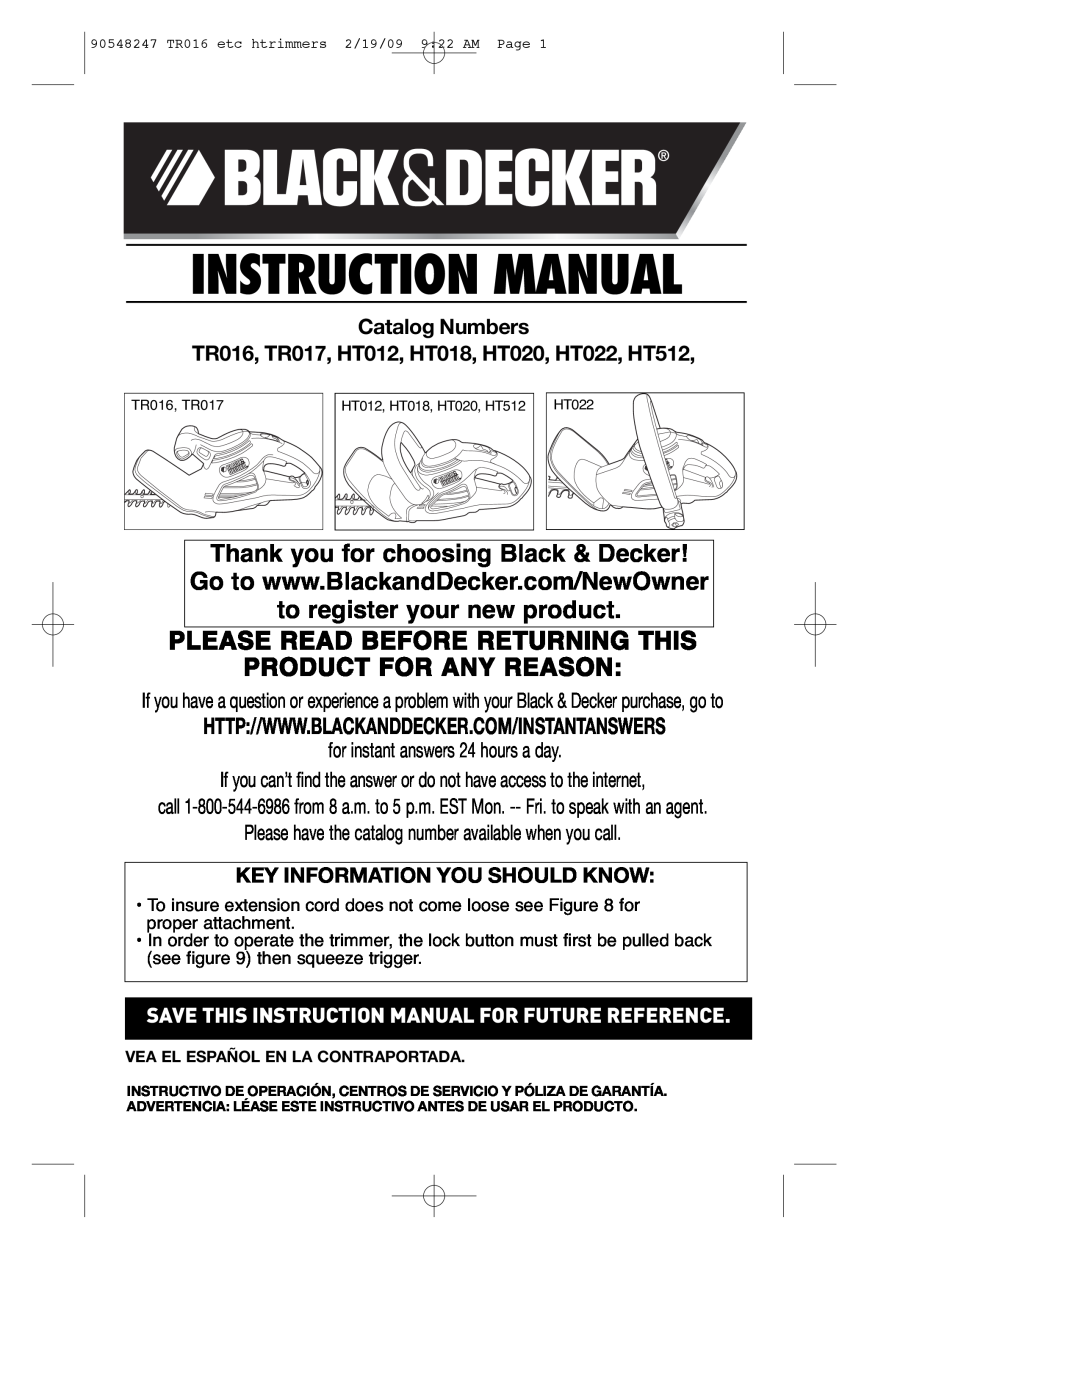 Black & Decker 90548247 instruction manual Instruction Manual, Please Read Before Returning This, Product For Any Reason 